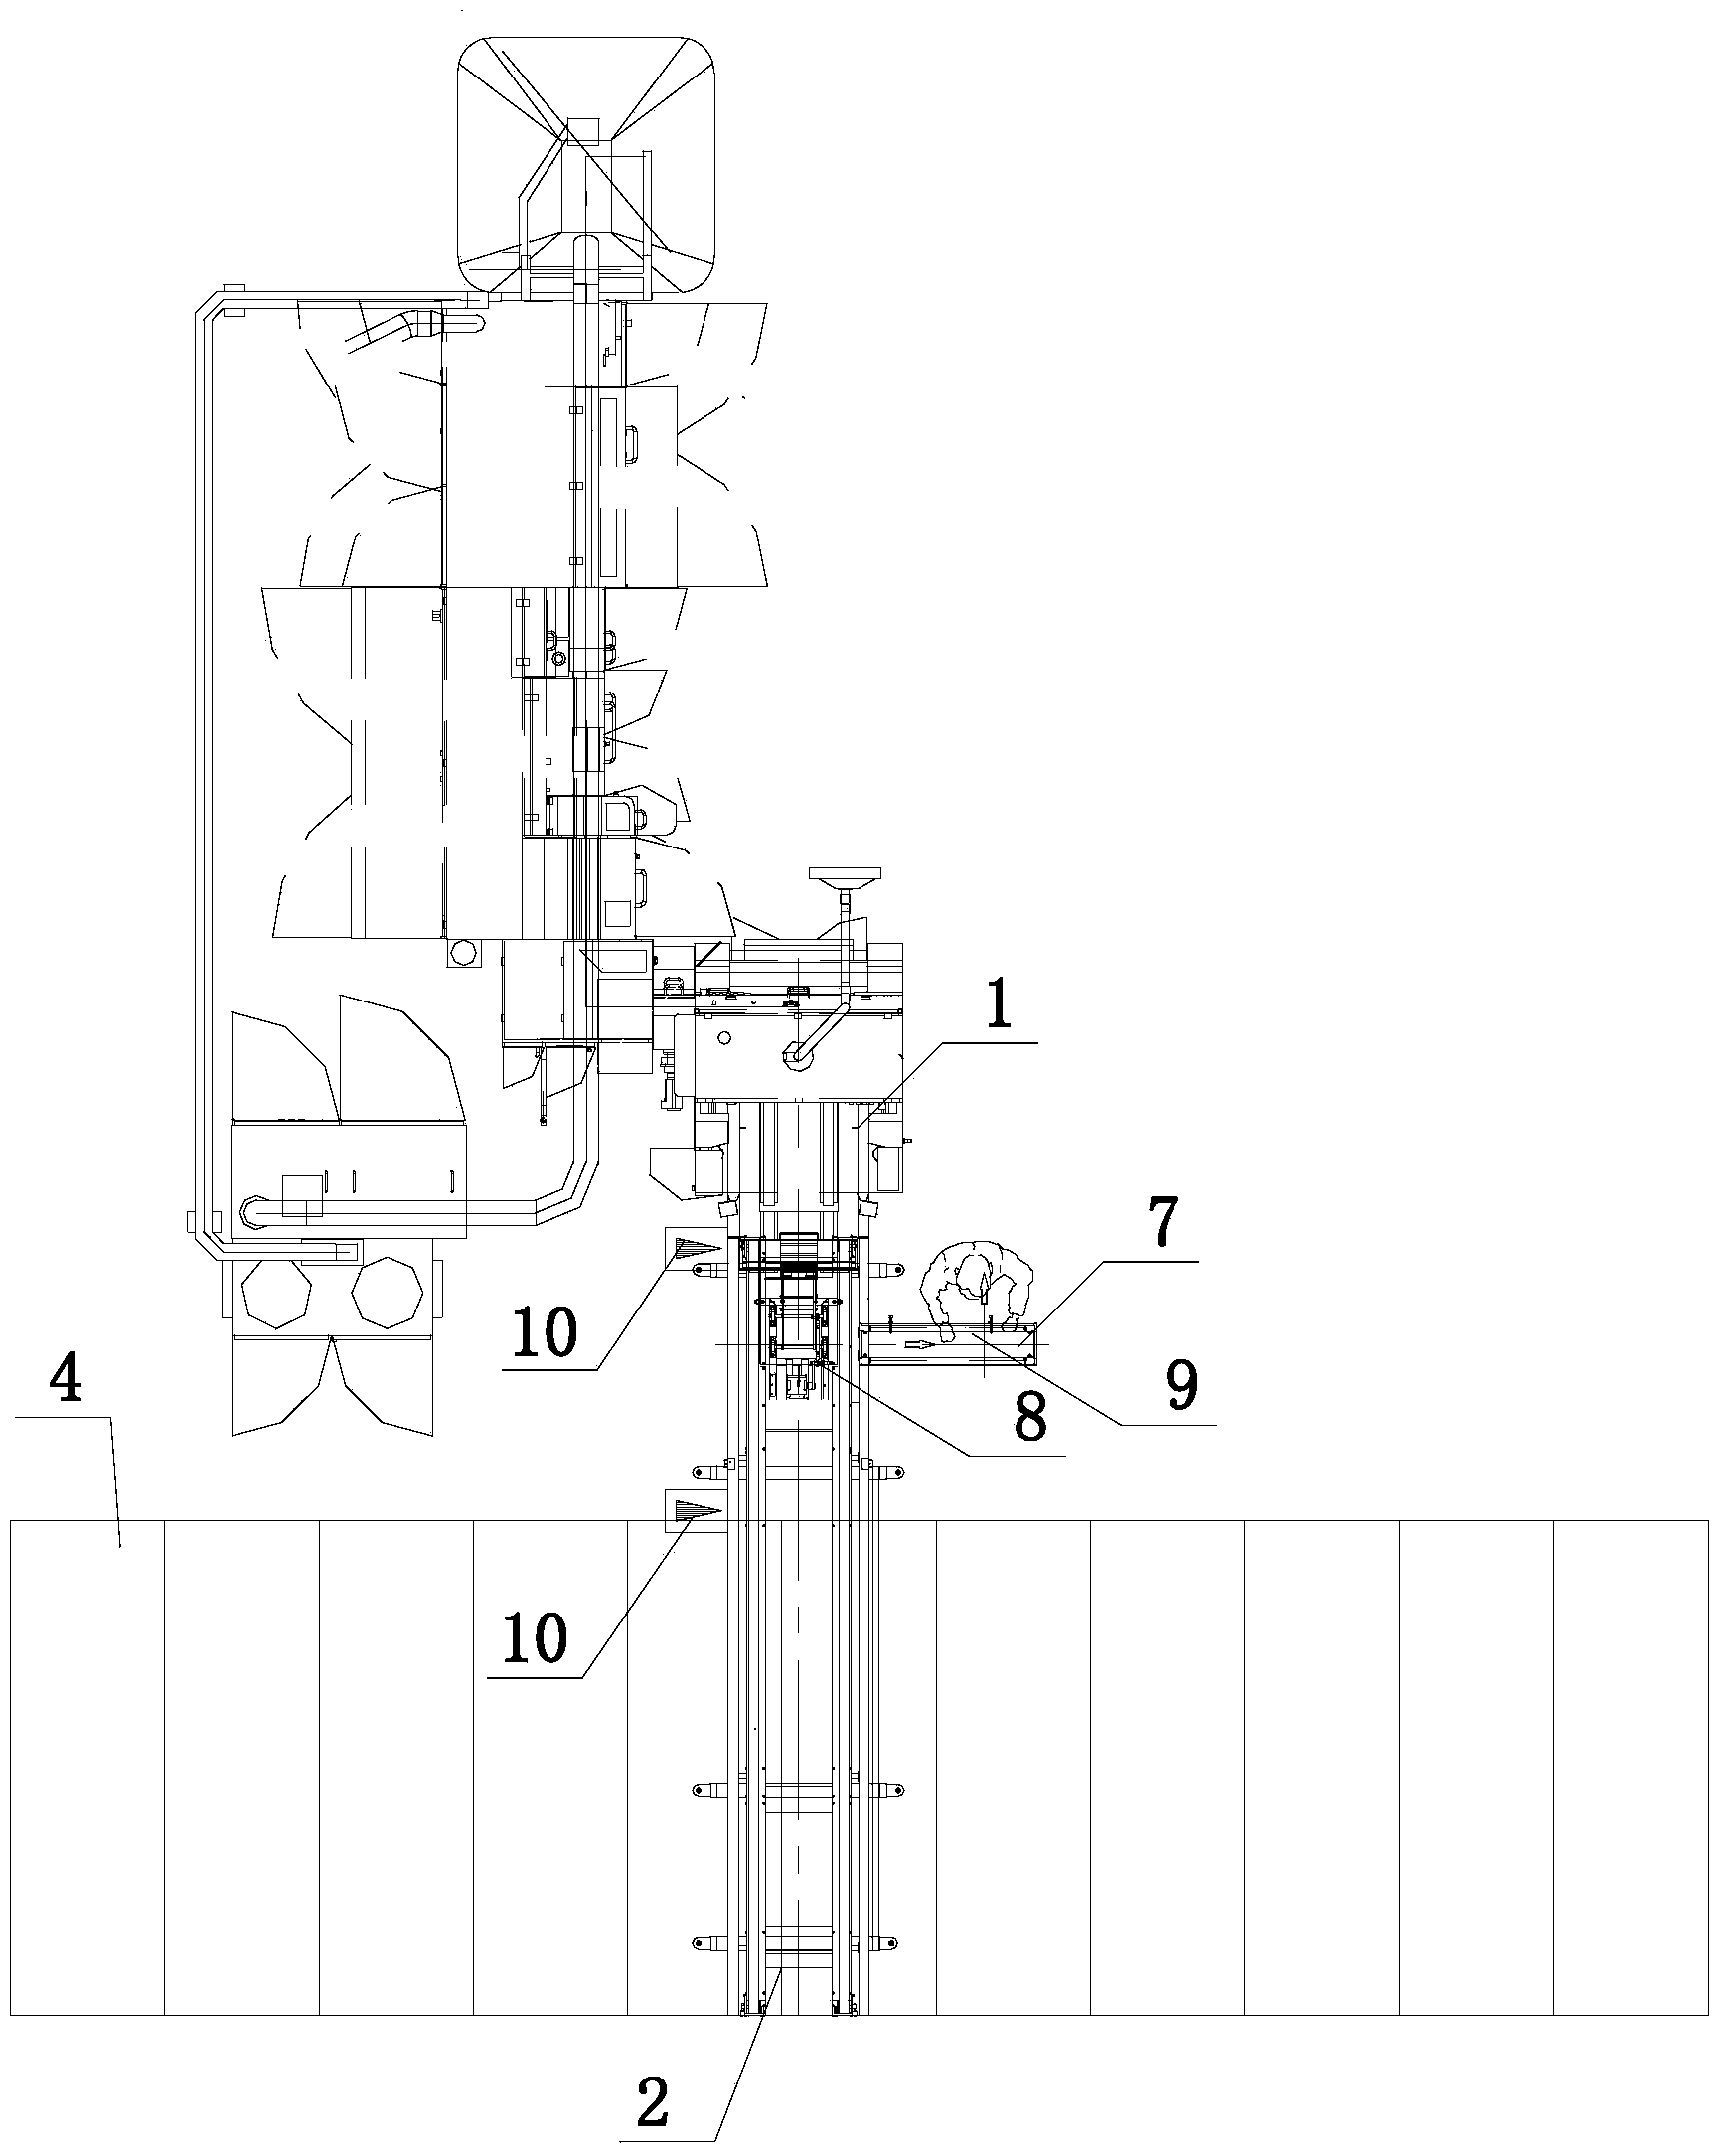 Material flow circulating system for filter candle empty and solid trays